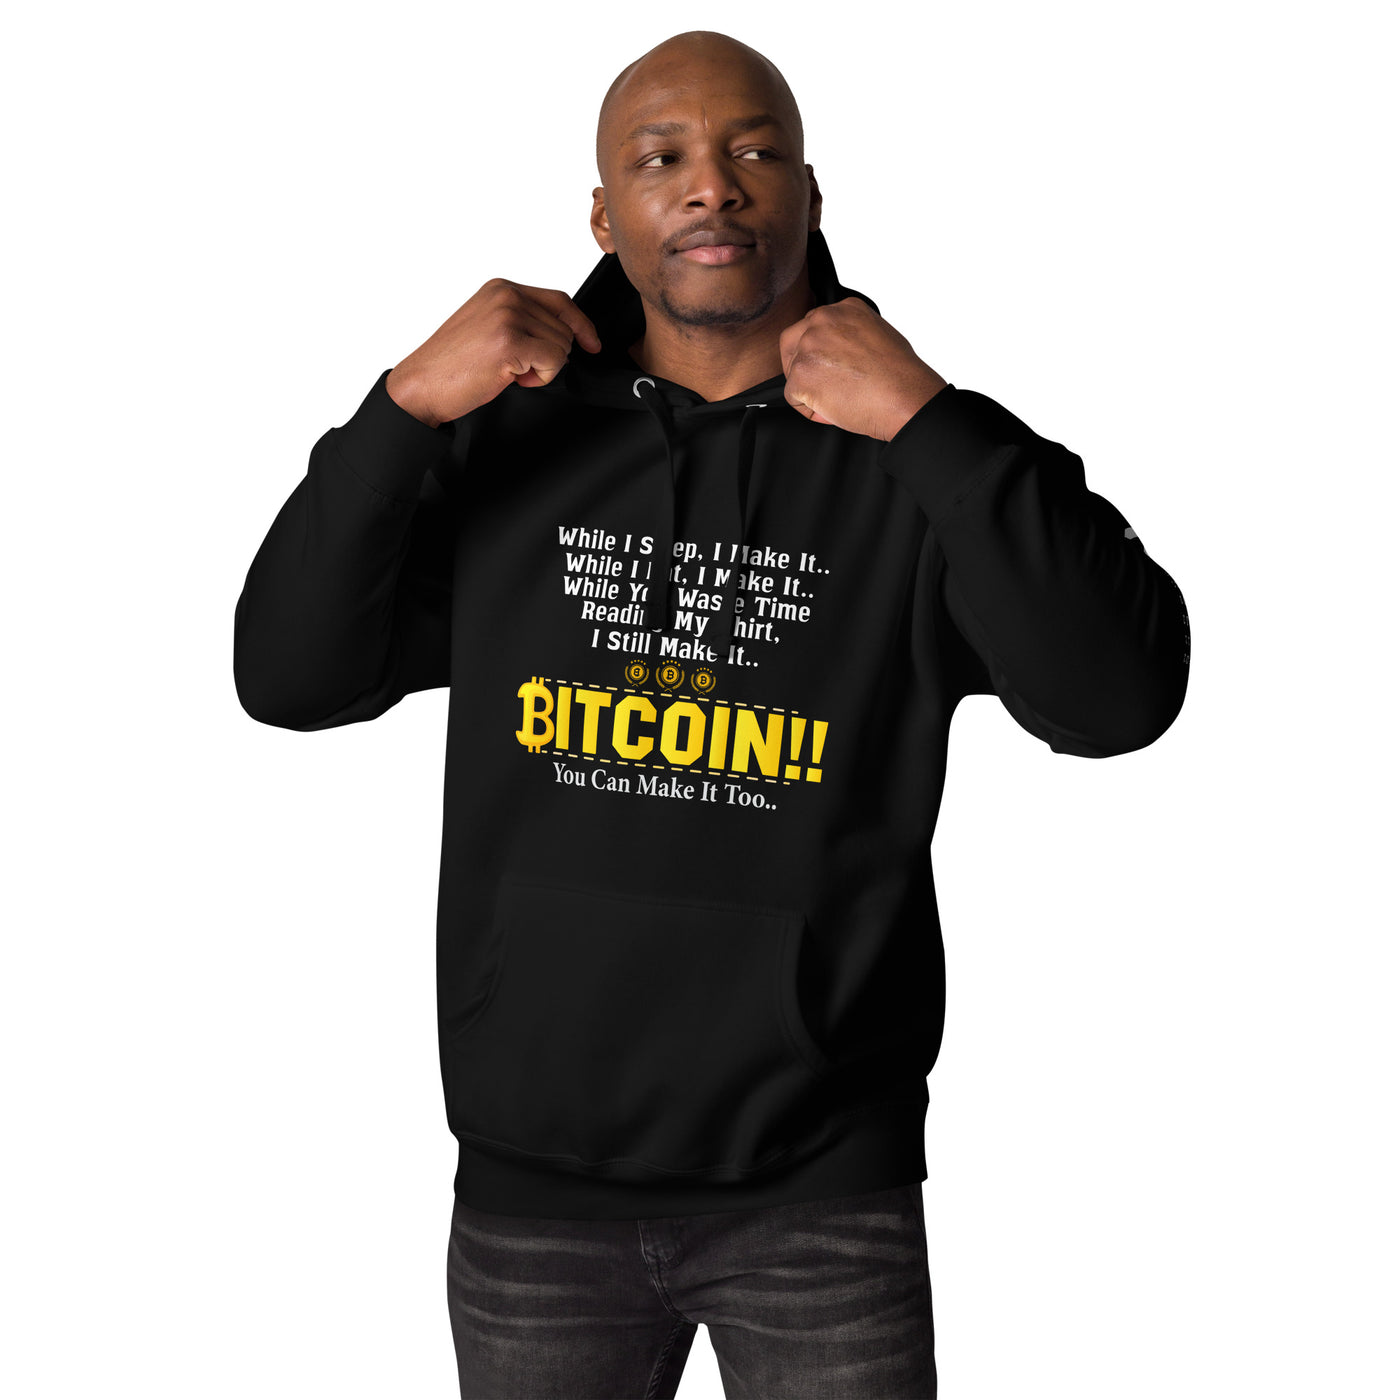 Bitcoin! You can Make it too Unisex Hoodie